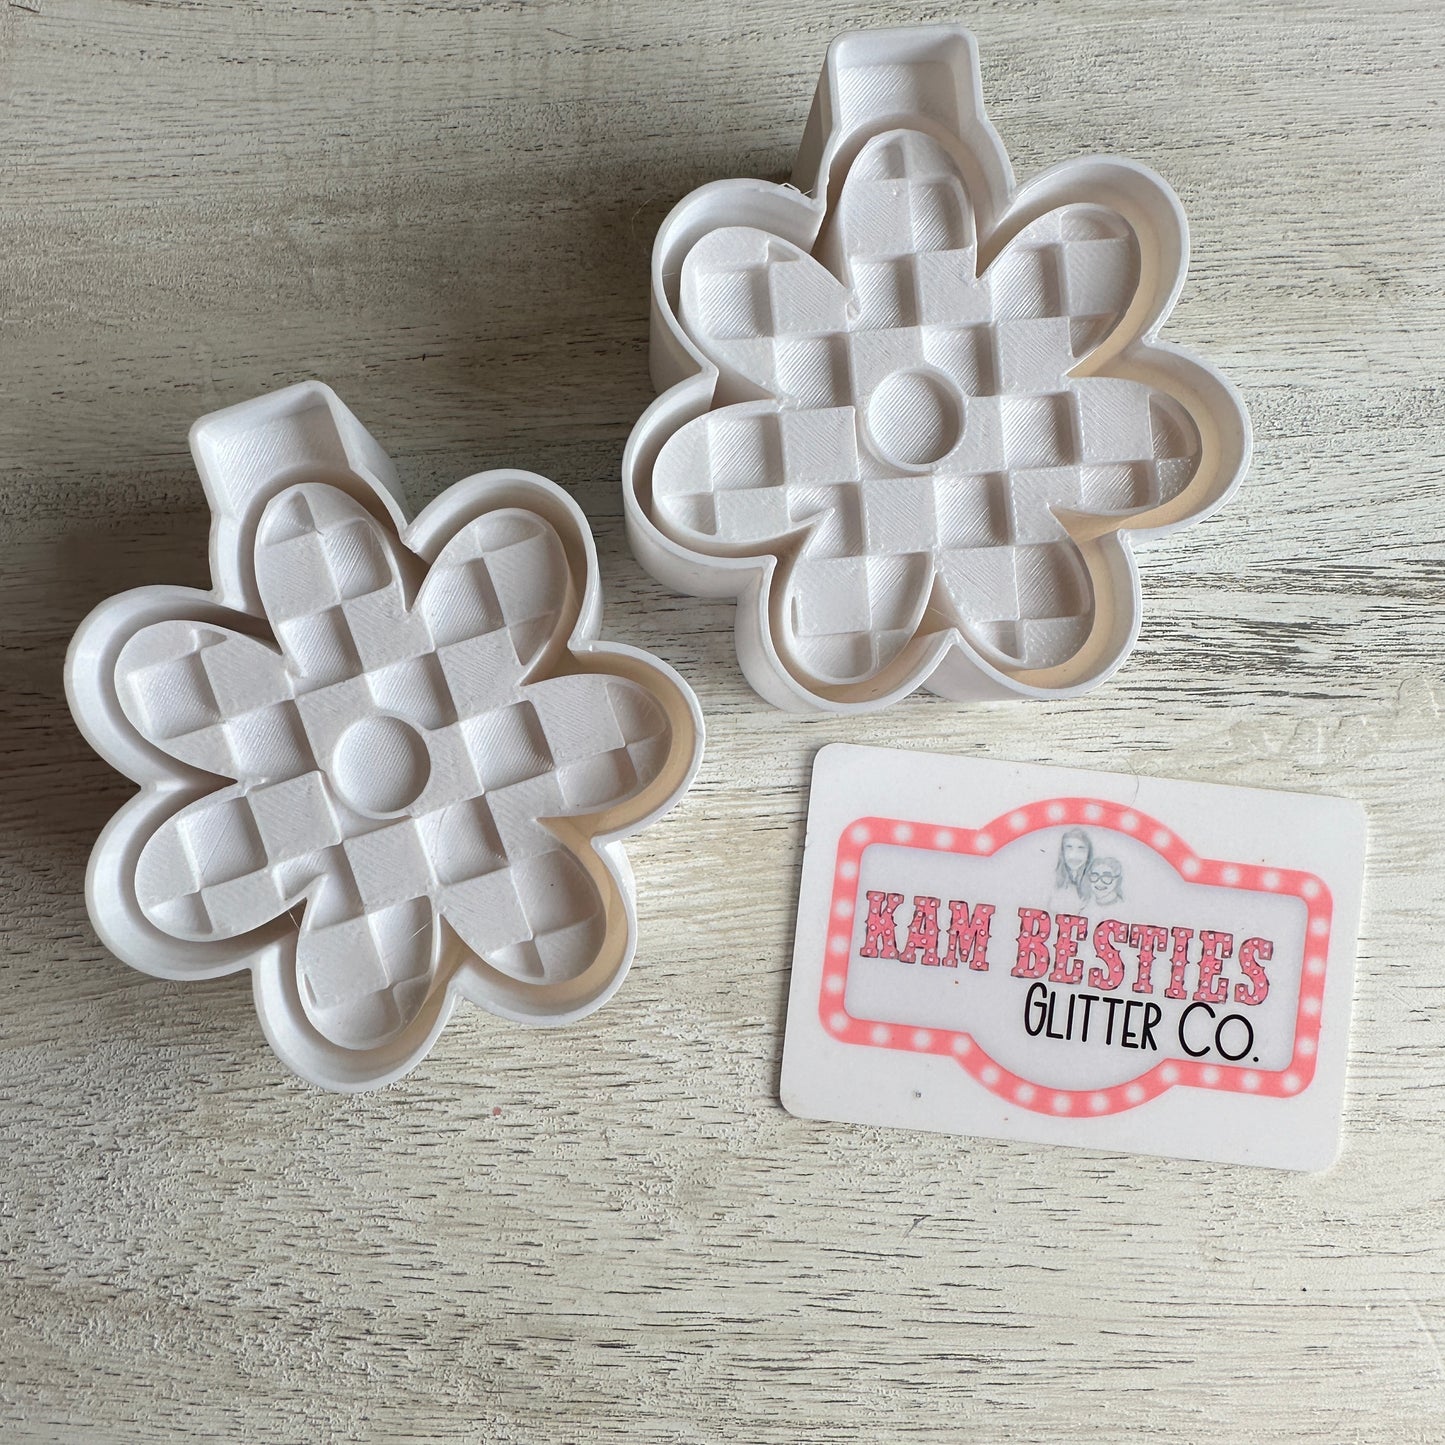 Checkered flower vent size molds